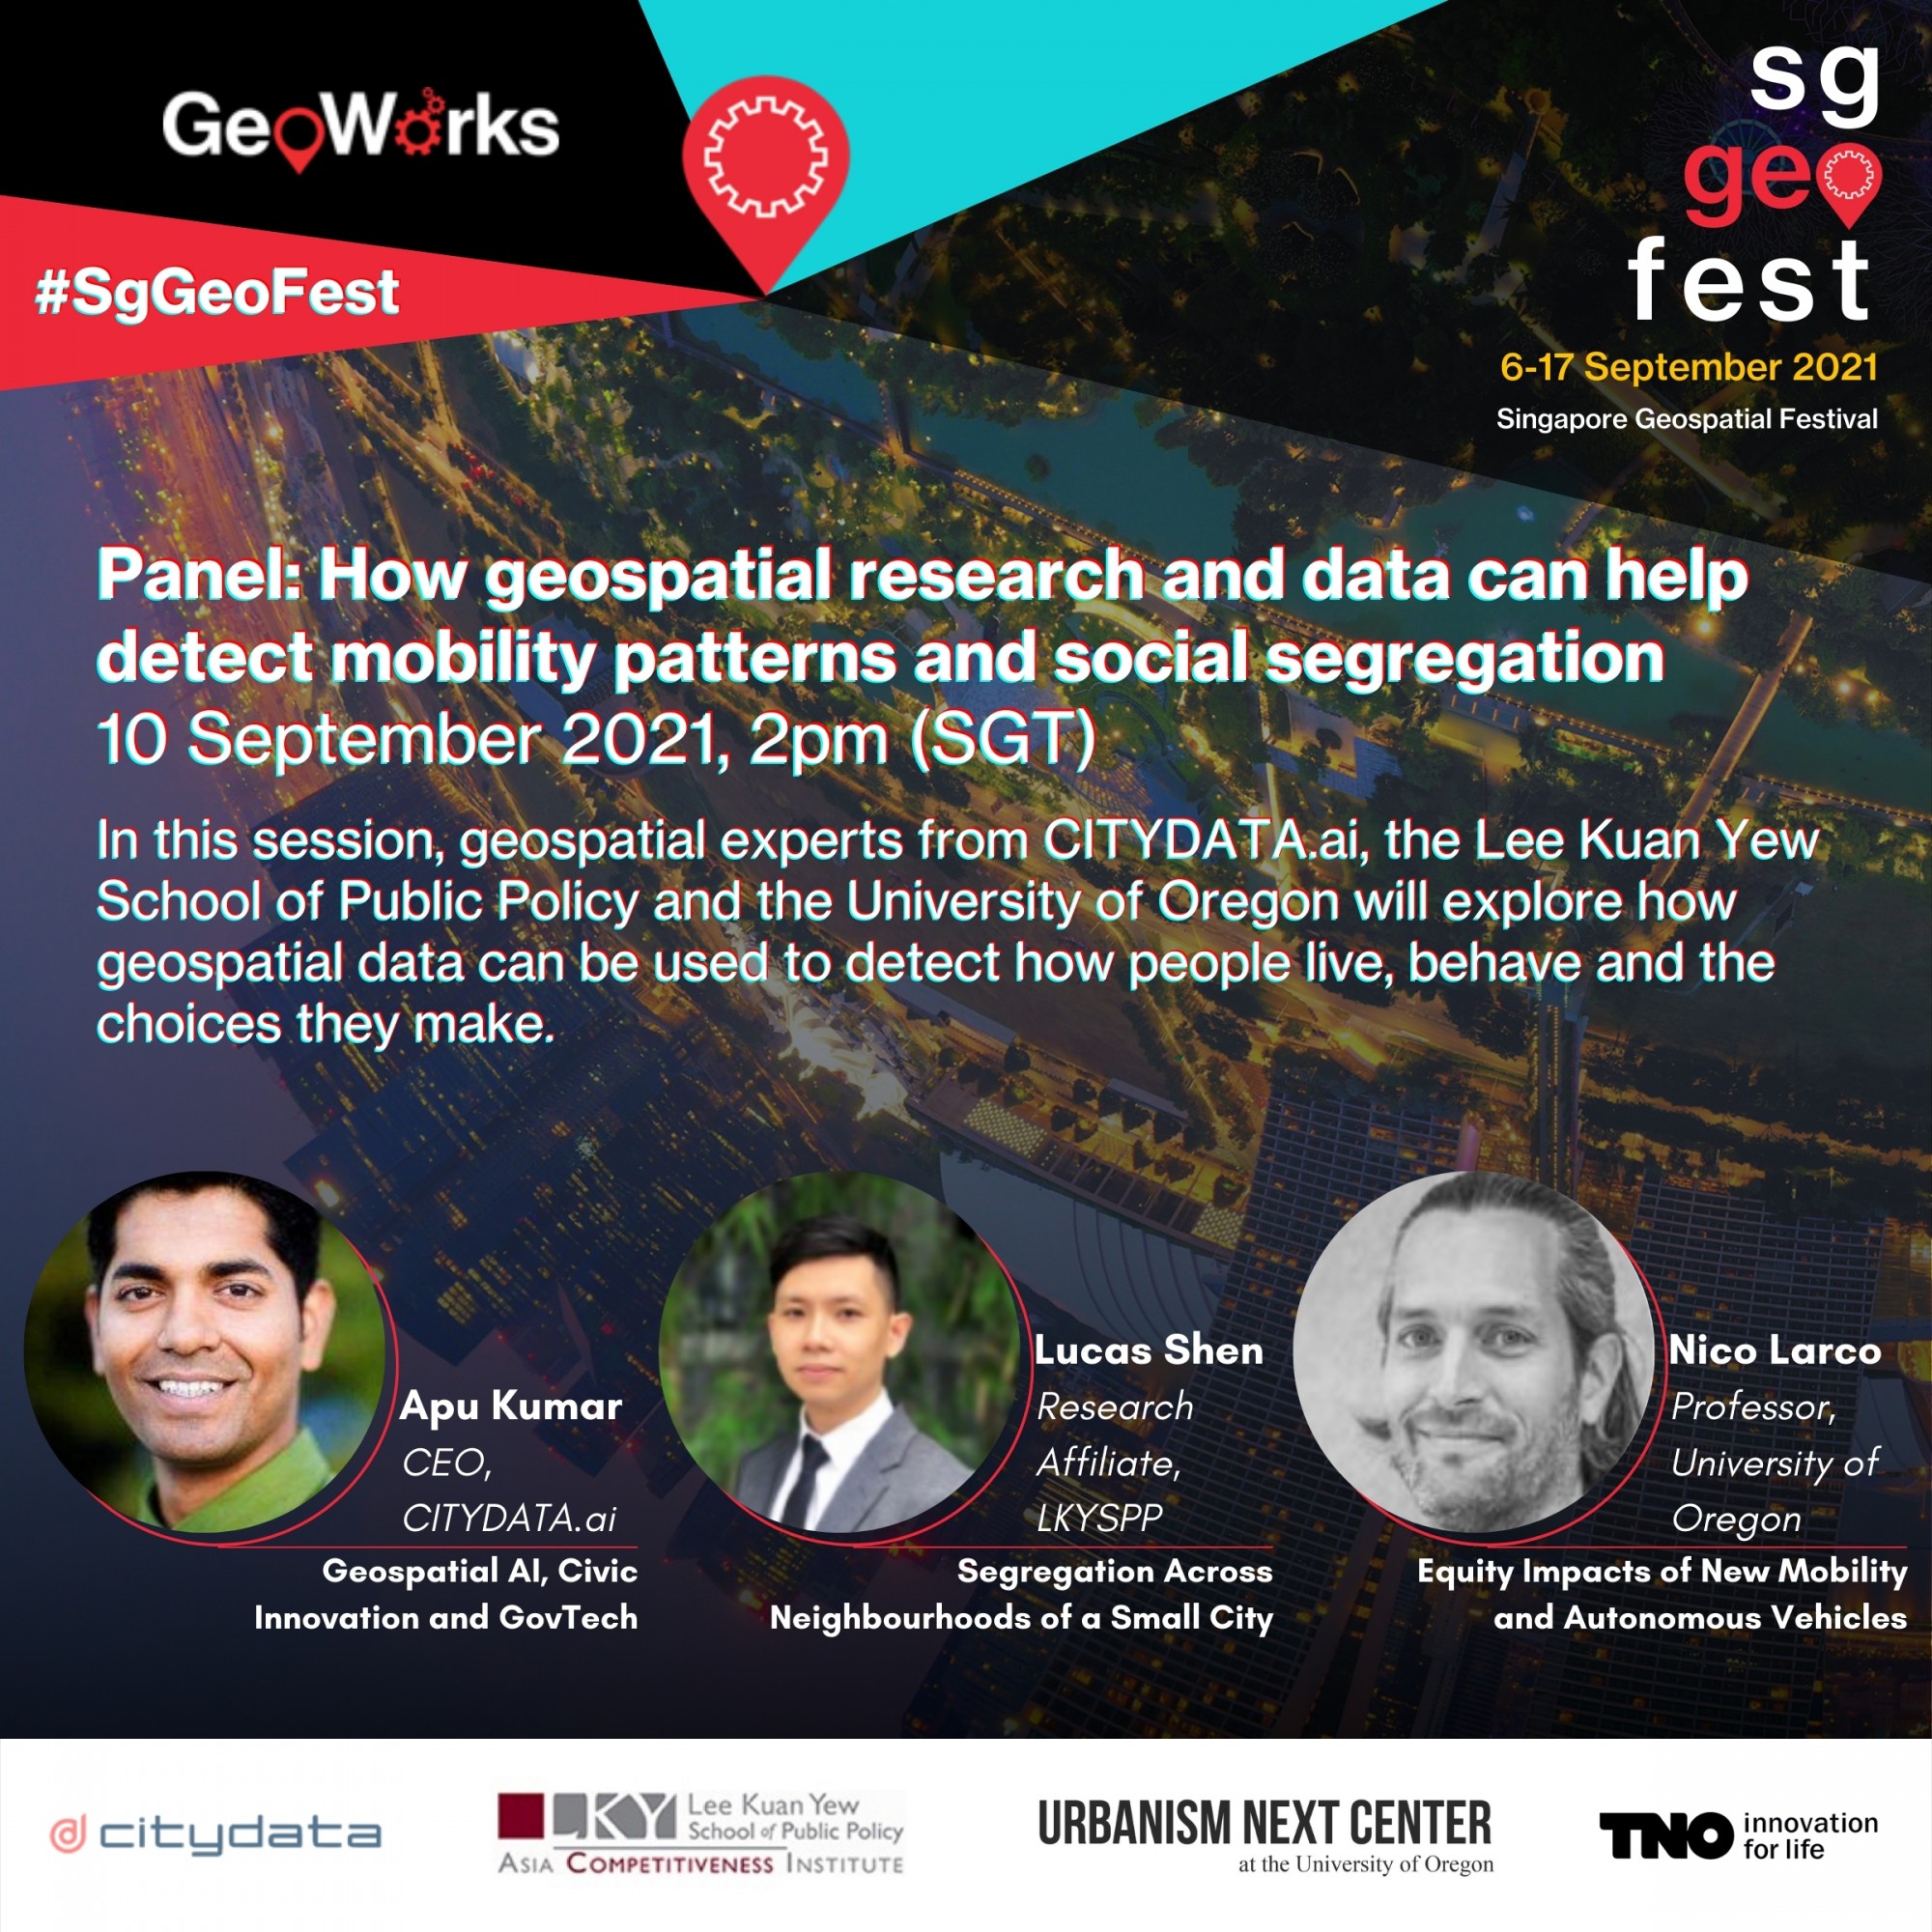 How Geospatial Research and Data Can Help Detect Mobility Patterns and Social Segregation